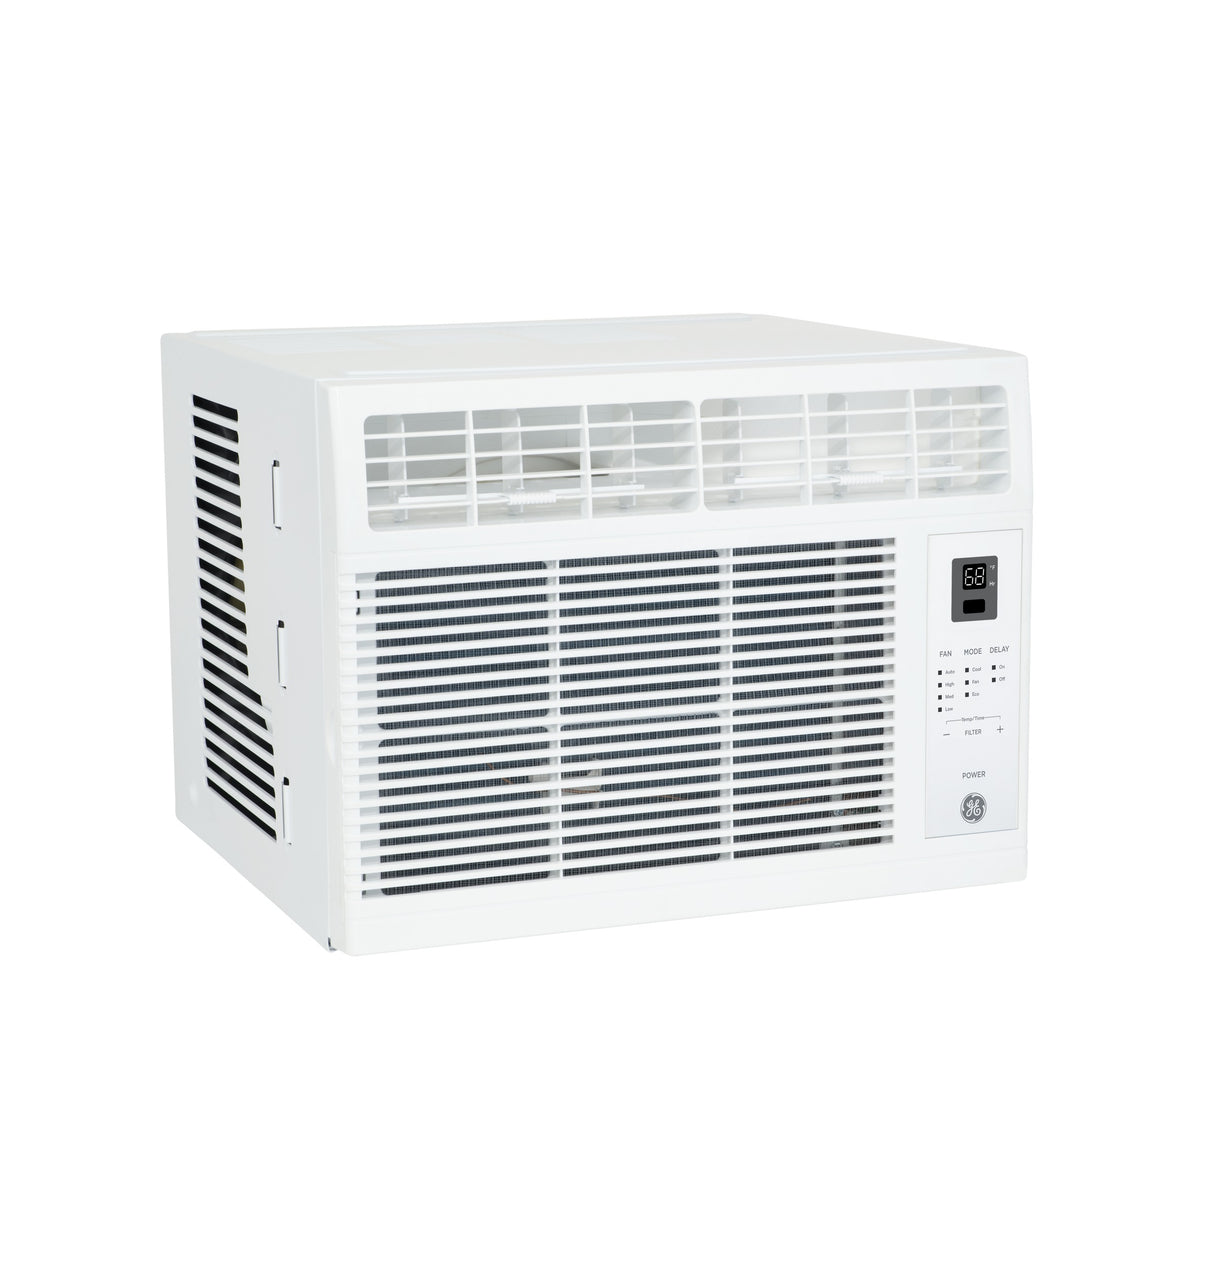 GE(R) 6,000 BTU Electronic Window Air Conditioner for Small Rooms up to 250 sq ft. - (AHW06LZ)